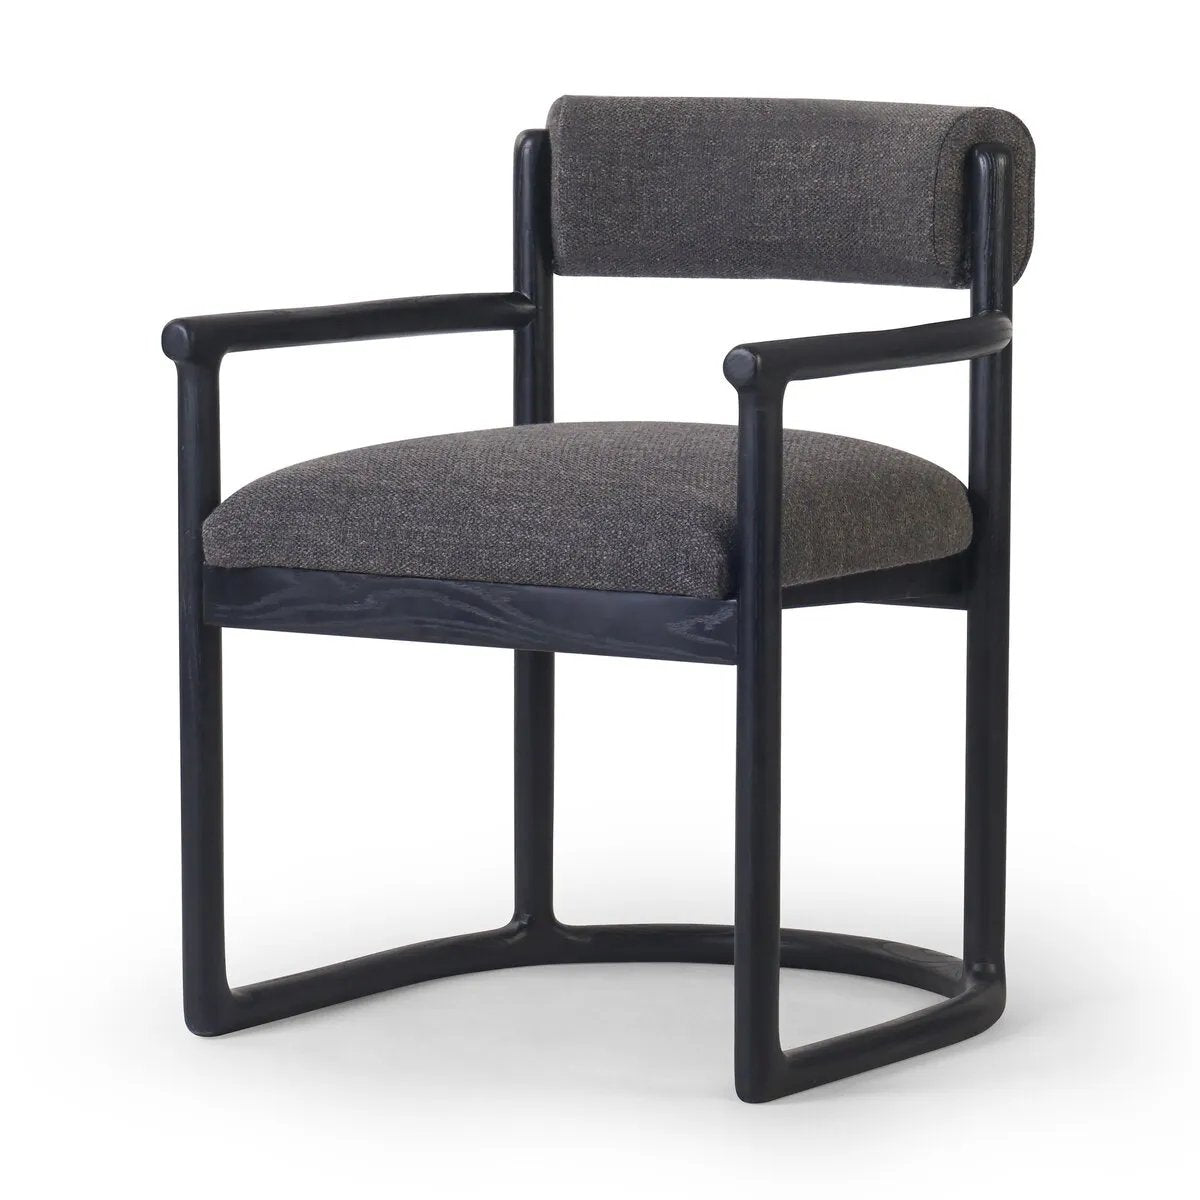 This Clarice Thames Ash Dining Chair is a versatile and stylish addition to your dining space. Its high-quality construction and sleek design provide comfort and elegance Amethyst Home provides interior design, new home construction design consulting, vintage area rugs, and lighting in the Tampa metro area.